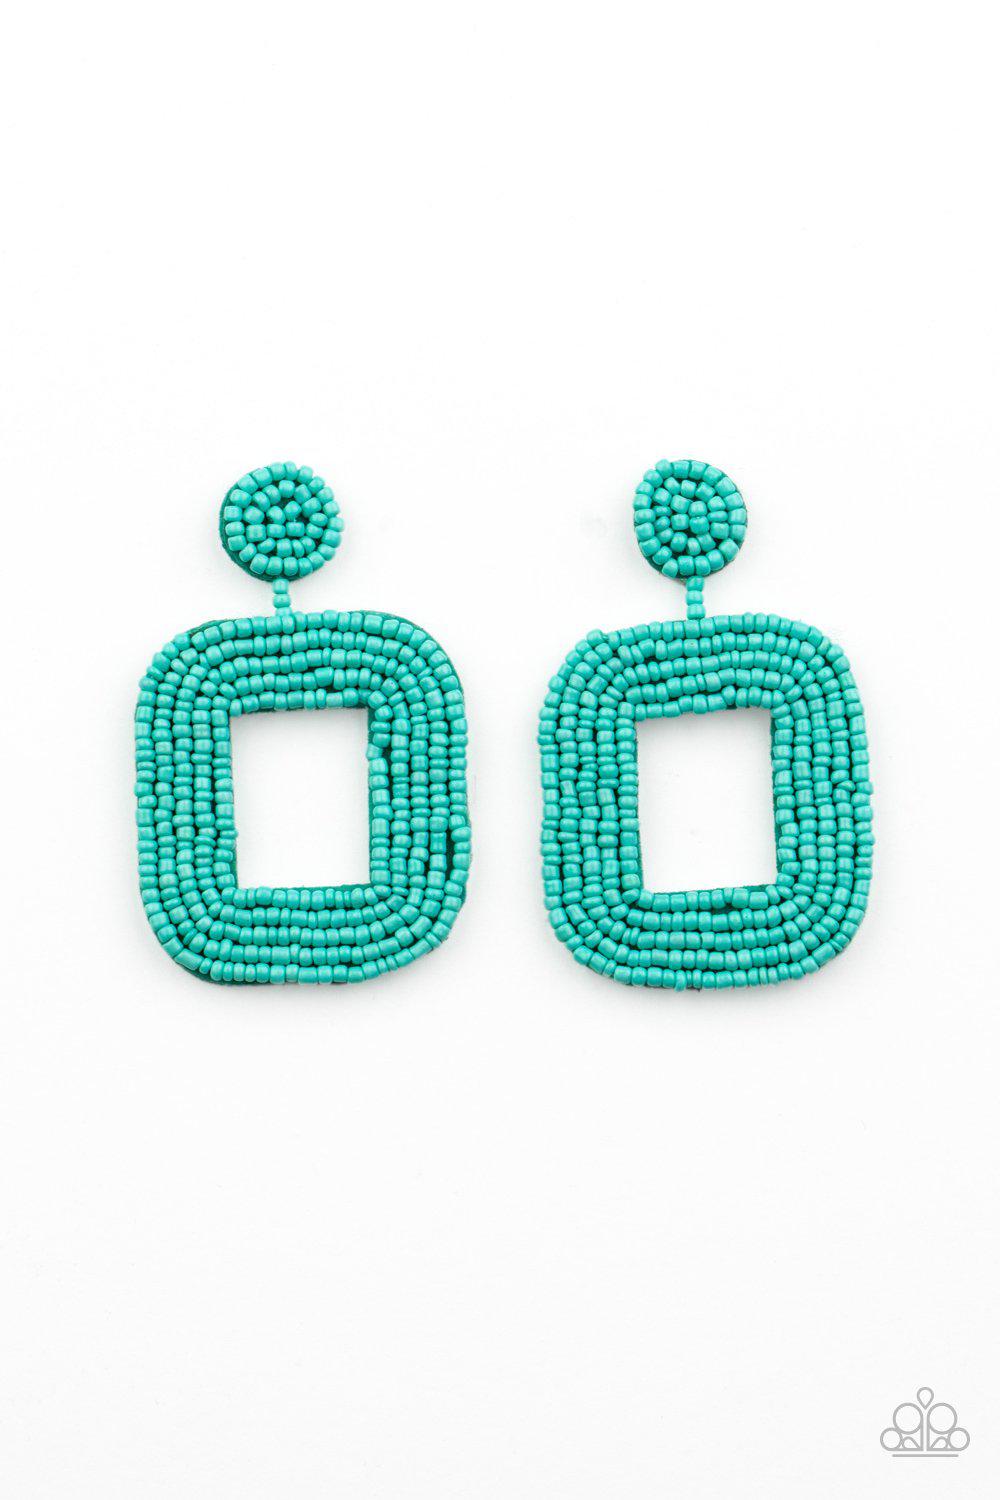 Beaded Bella Turquoise Blue Seed Bead Earrings - Paparazzi Accessories - lightbox -CarasShop.com - $5 Jewelry by Cara Jewels